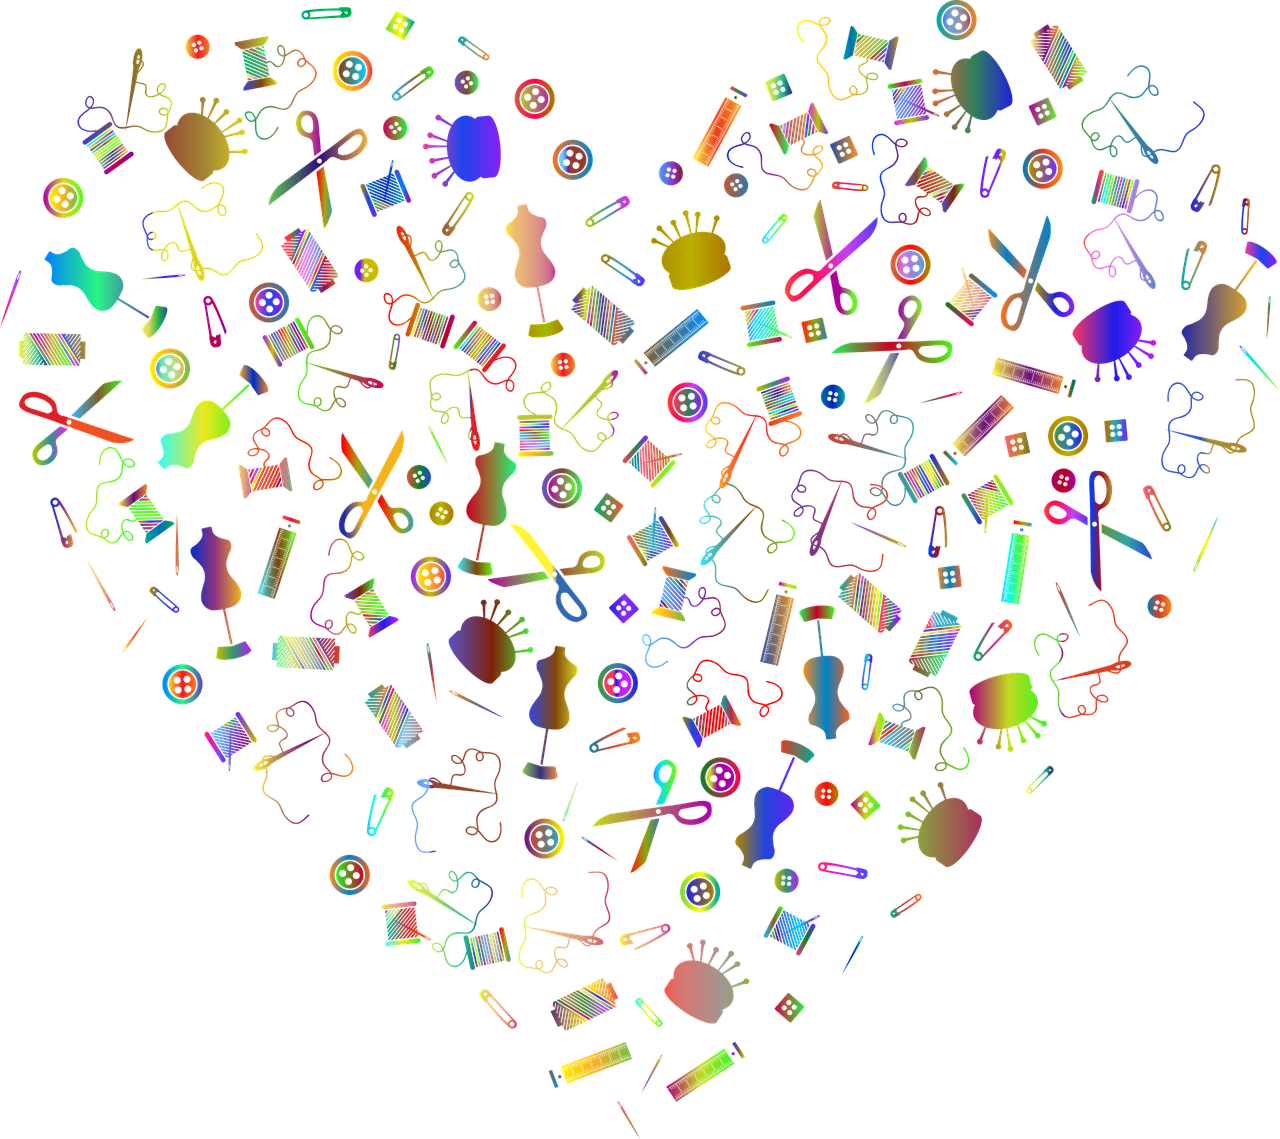 sewing tools, heart, icons-6785056.jpg